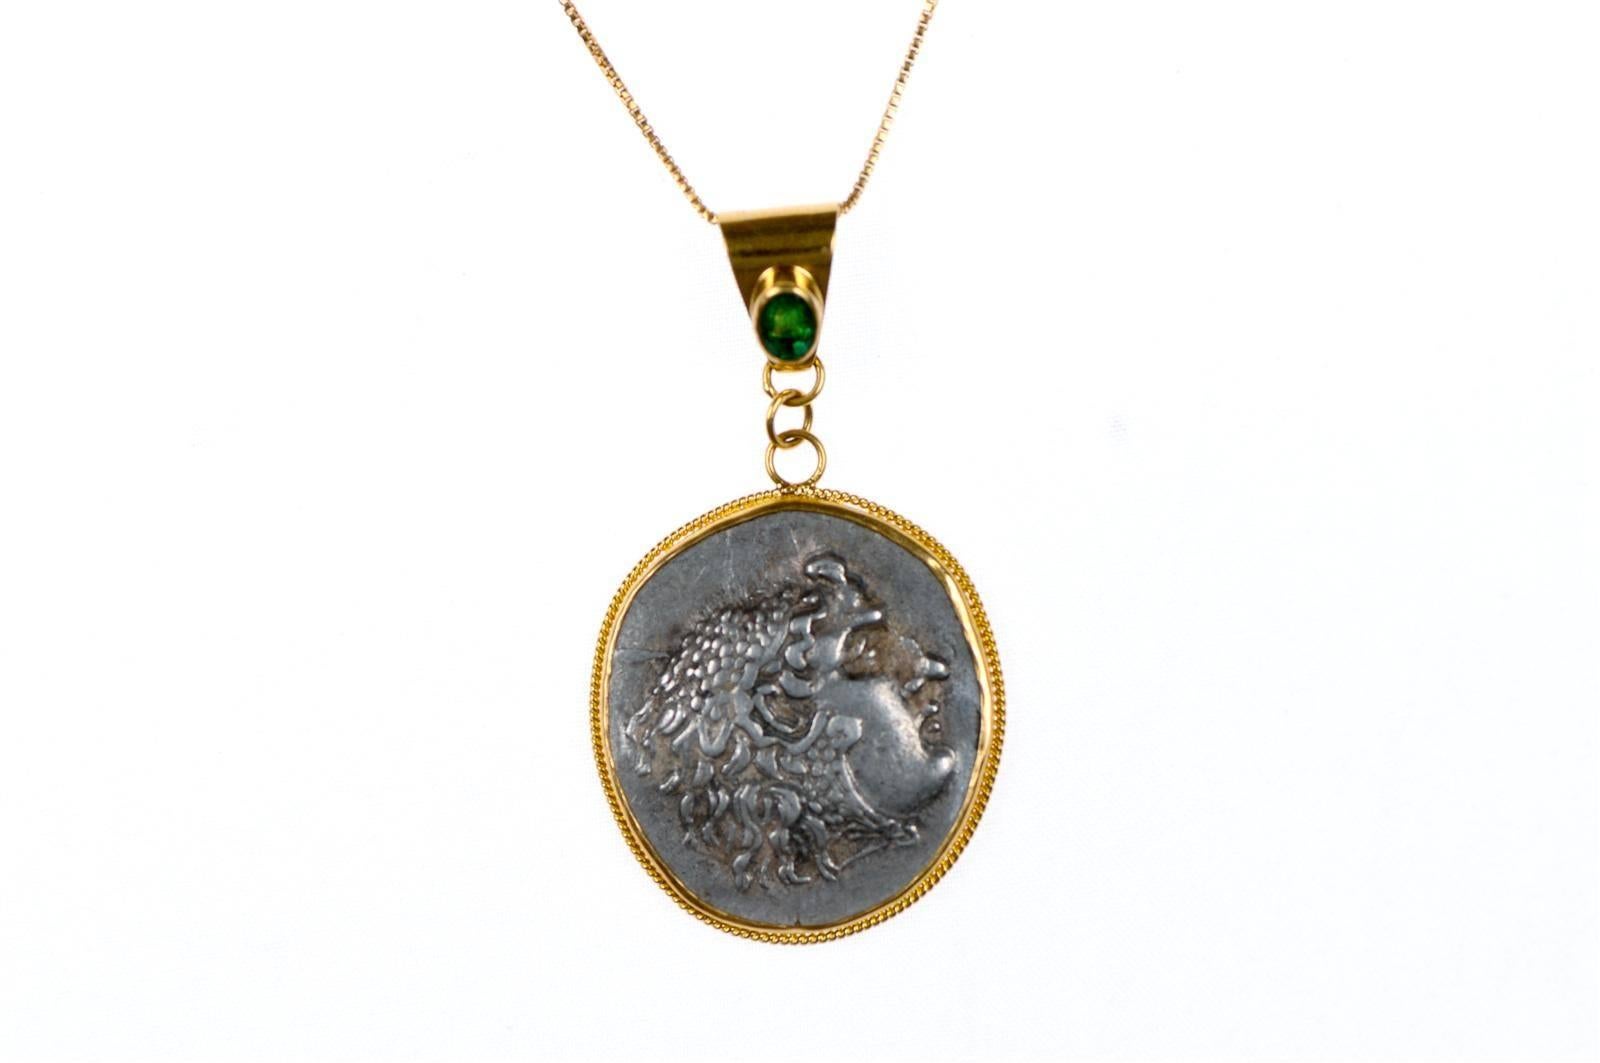 An Authentic Greek (Macedonian) Alexander the Great Tetradrachm Coin, 336-323 BC, set in a 22-karat gold bezel and Bail with an Emerald Stone Accent. Obverse of Coin is Heracles and Zeus Reverse. Coin pendant measures approximately 2 1/3